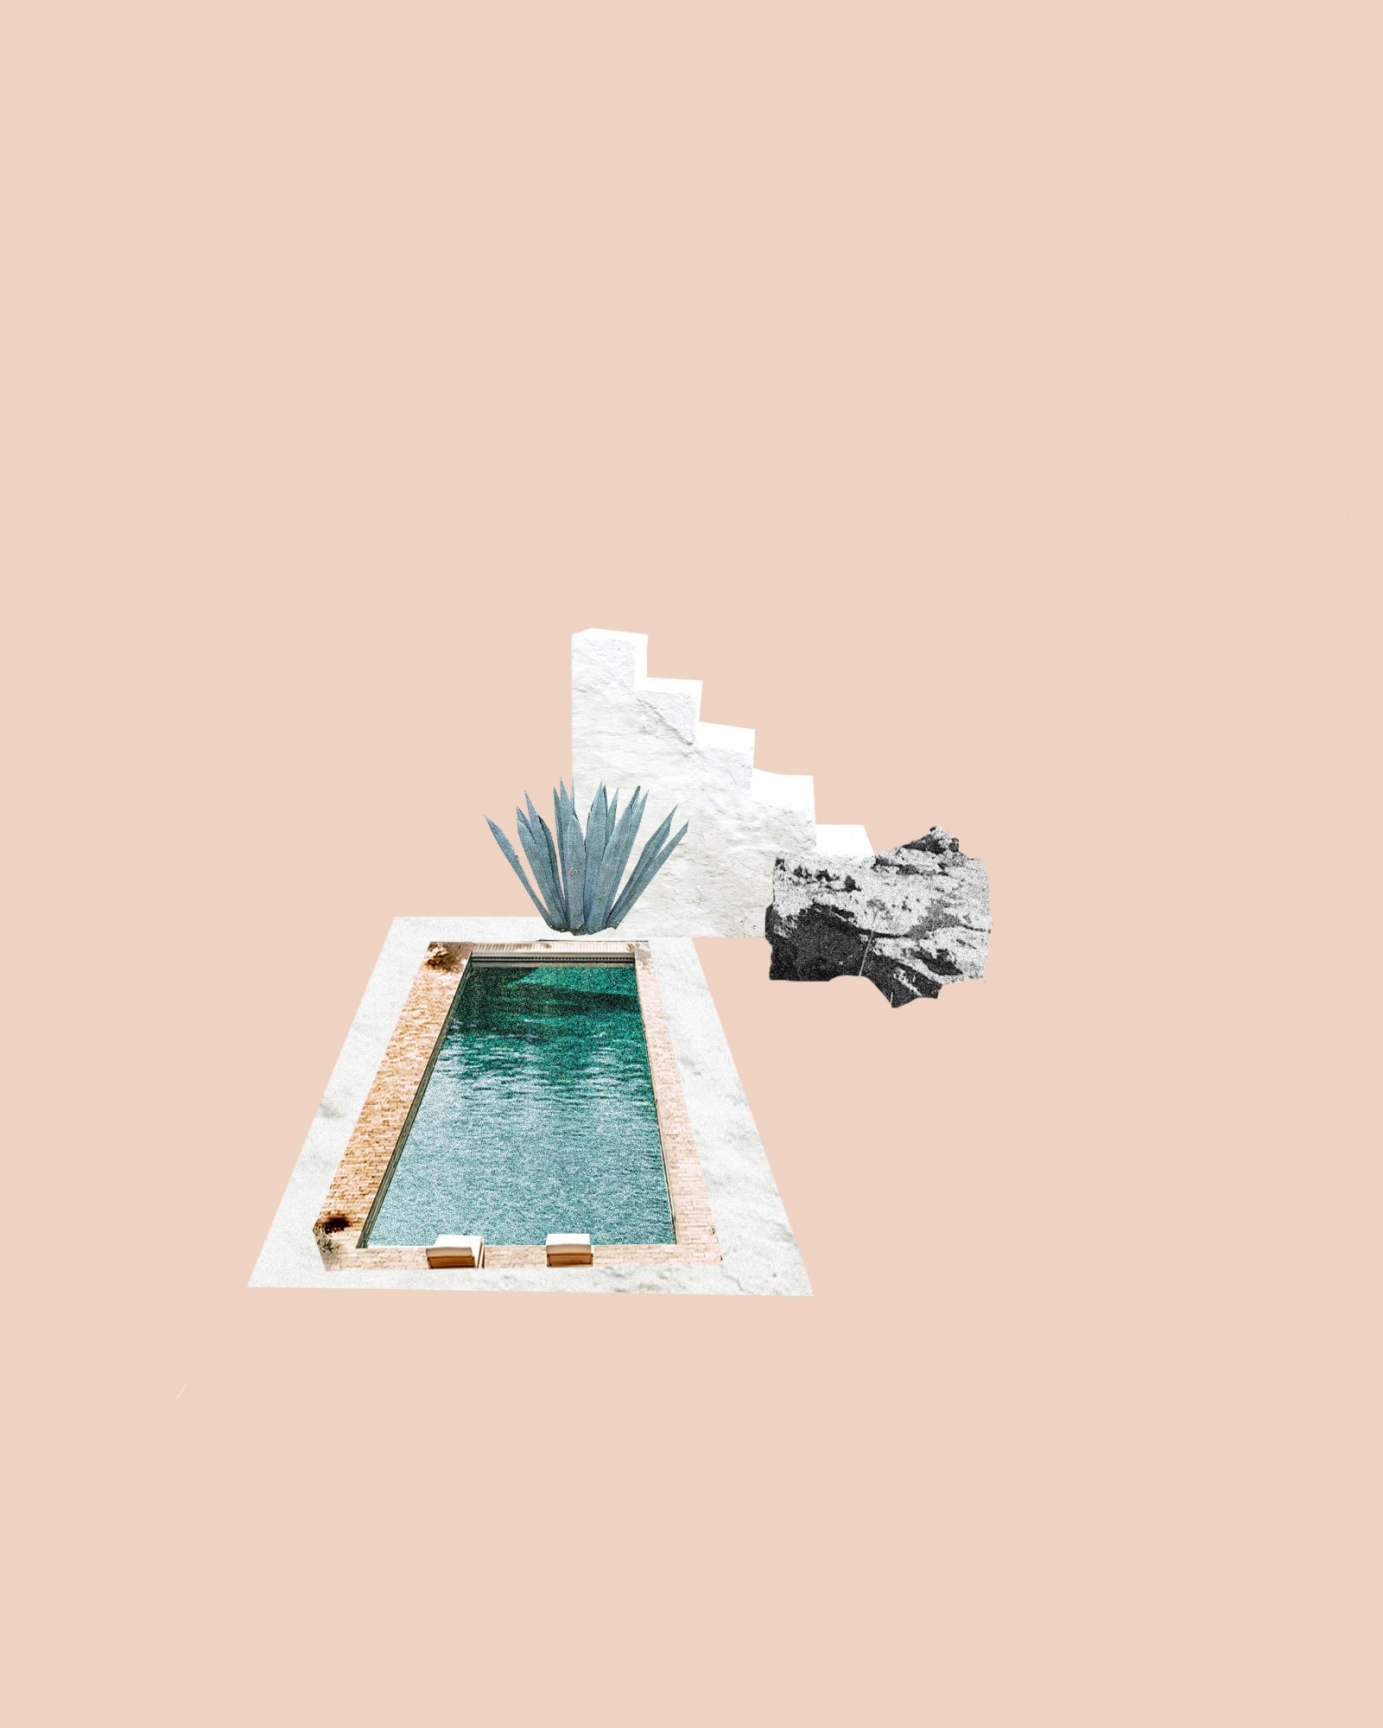 The poolside series